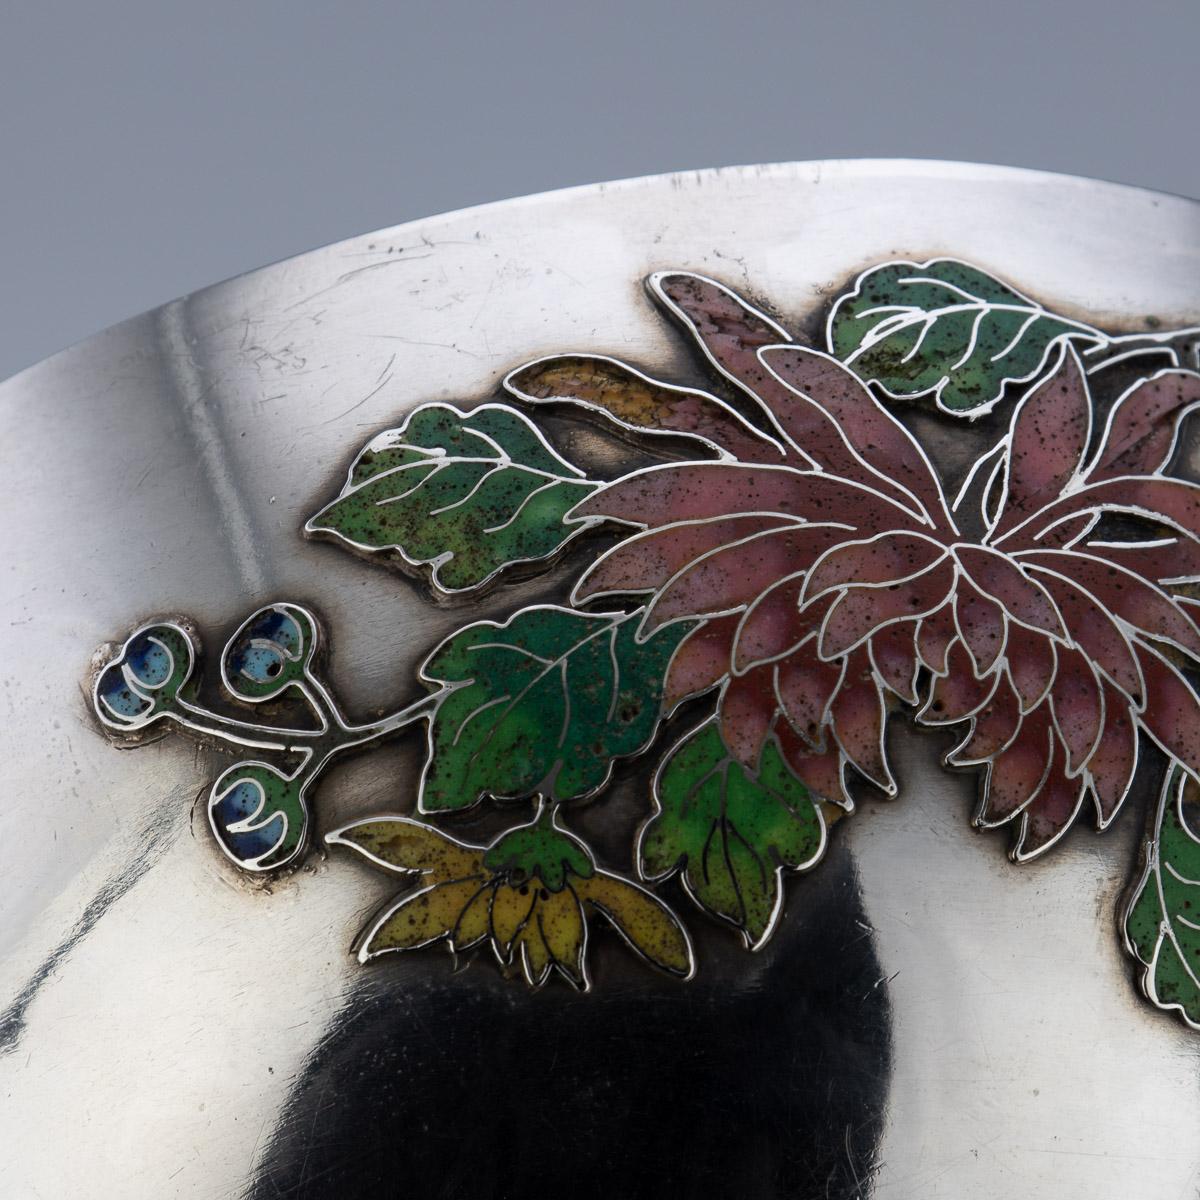 19th Century Rare Chinese Export Solid Silver & Enamel Bowl, Wang Hing, c.1890 For Sale 4